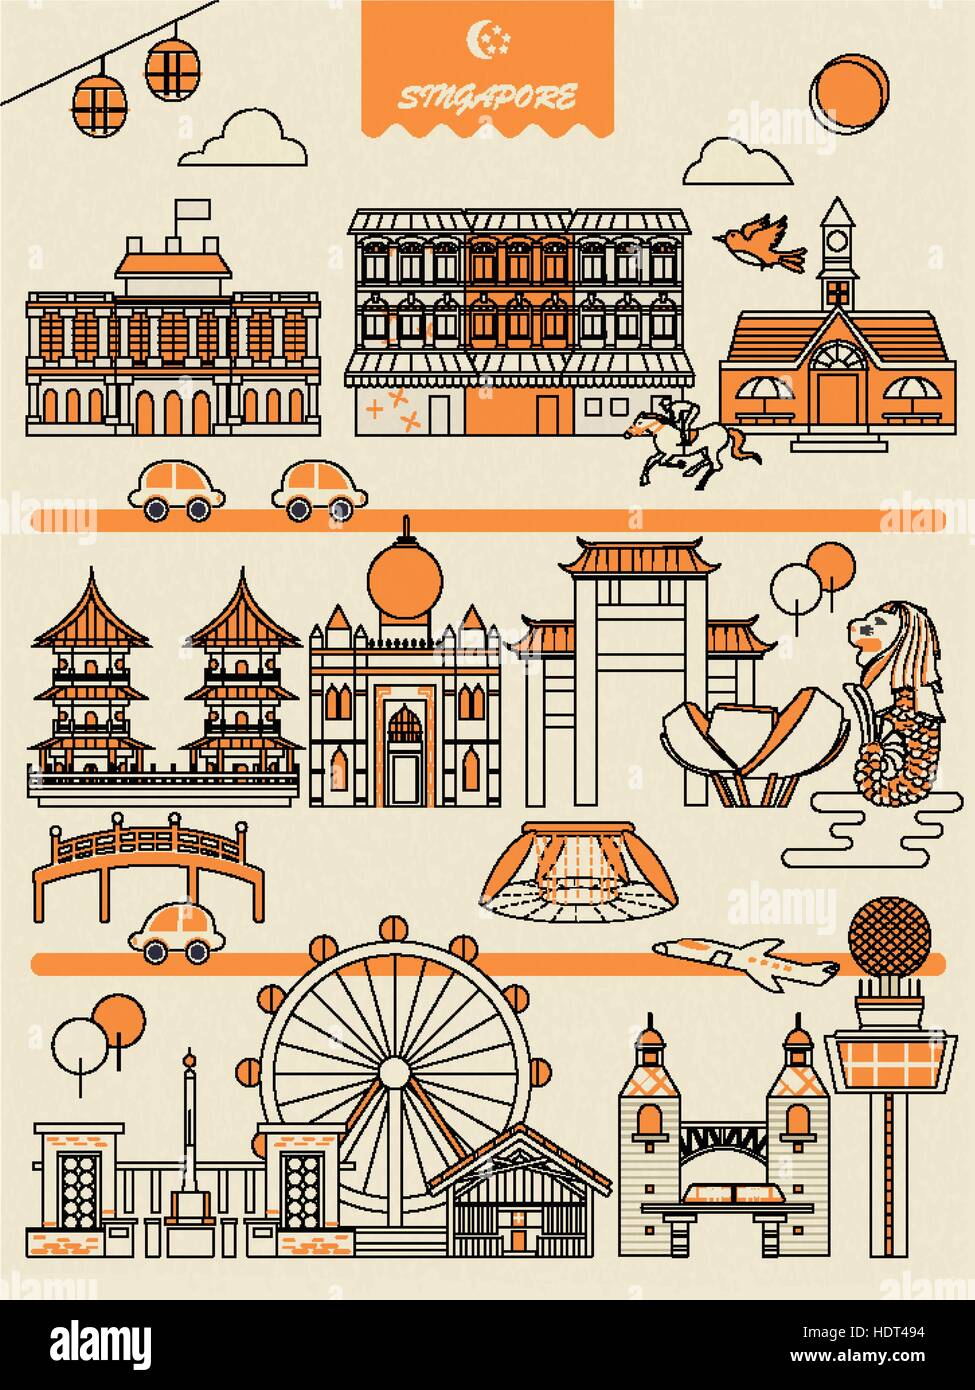 Singapore must see attractions poster in flat style Stock Vector